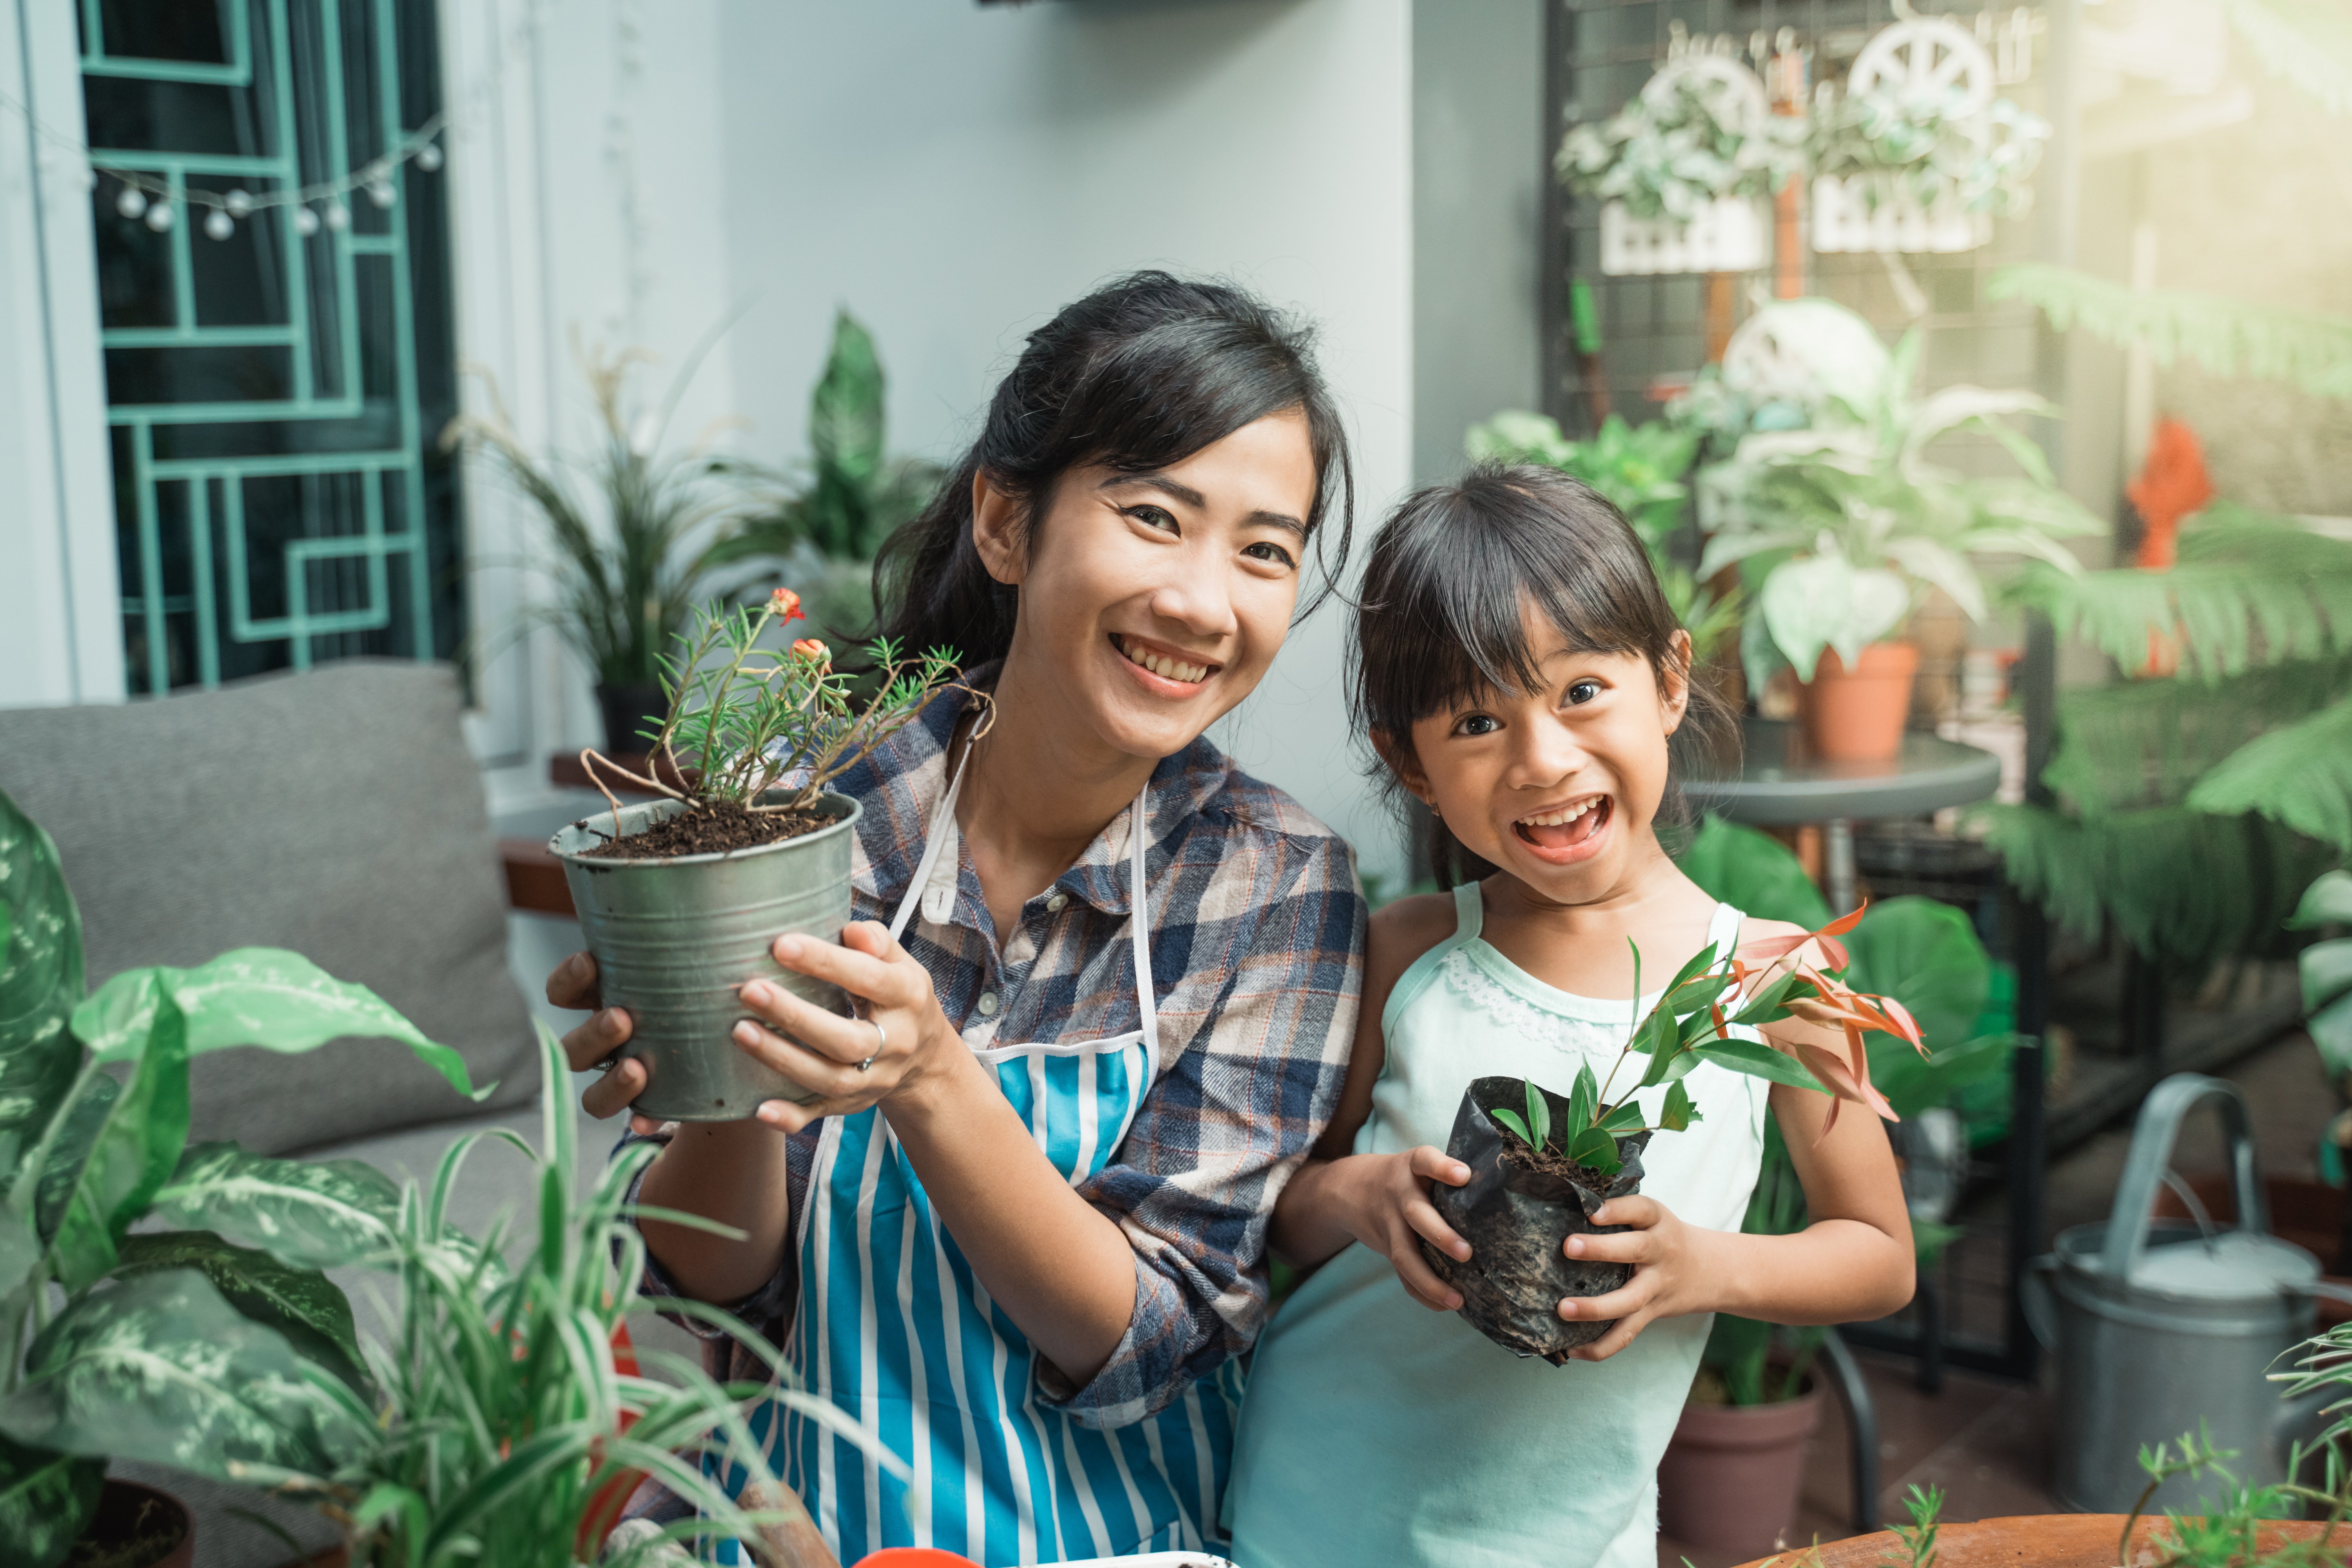 mother and daughter gardening potted plants green thumb smiling